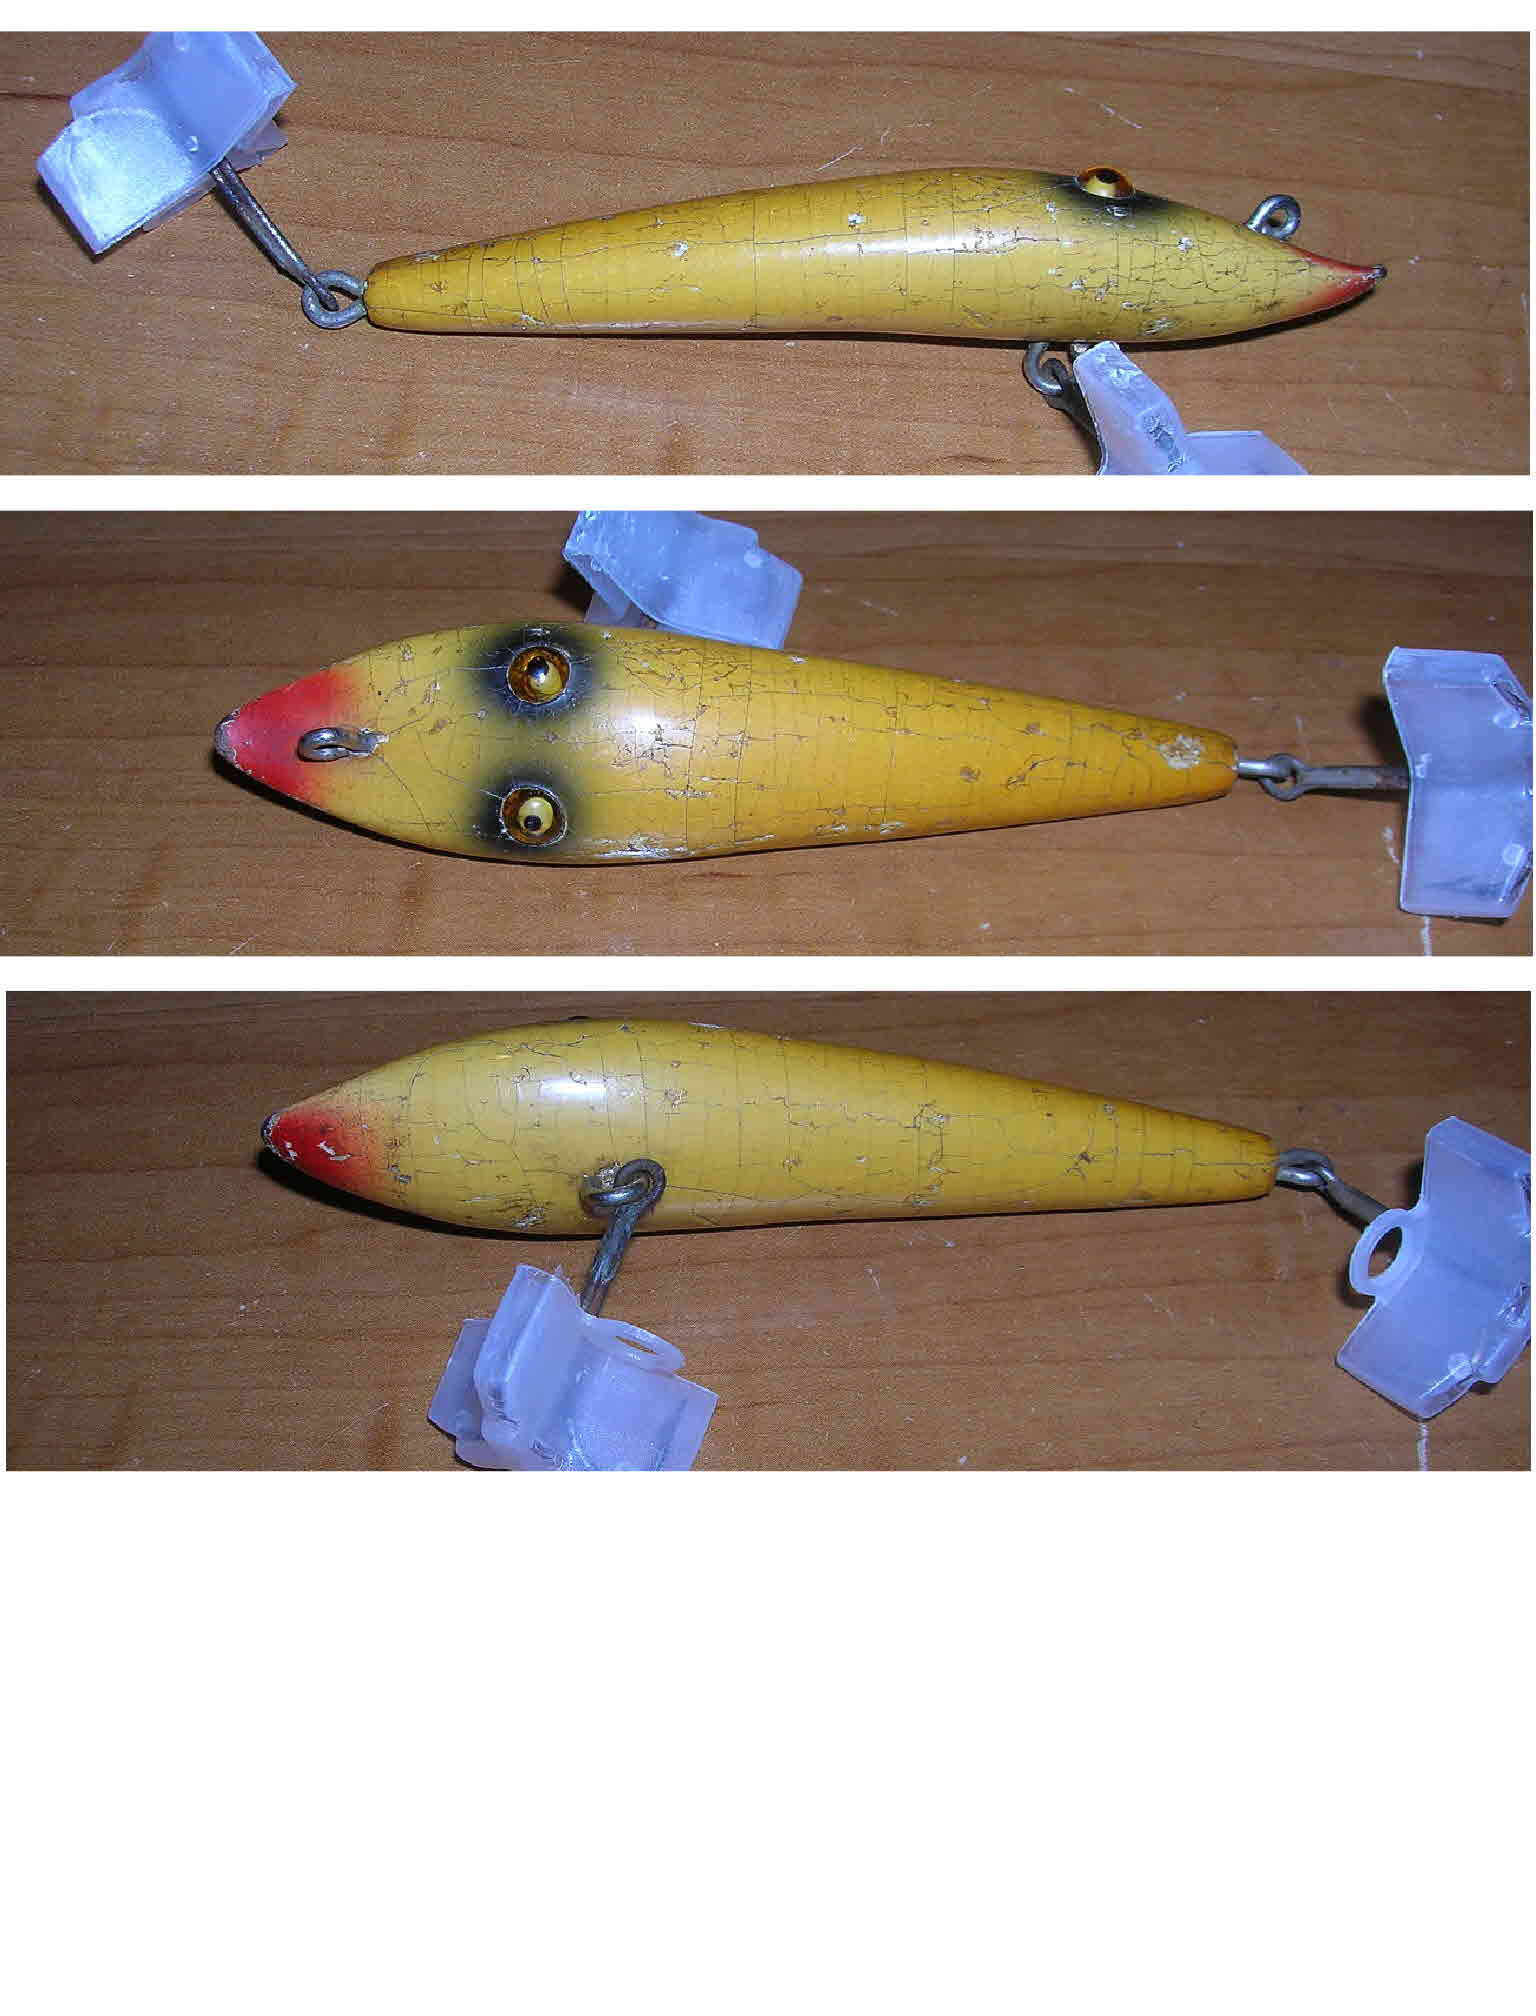 Two old wooden lures Babe-Oreno with glass eyes 4 Heddon stick